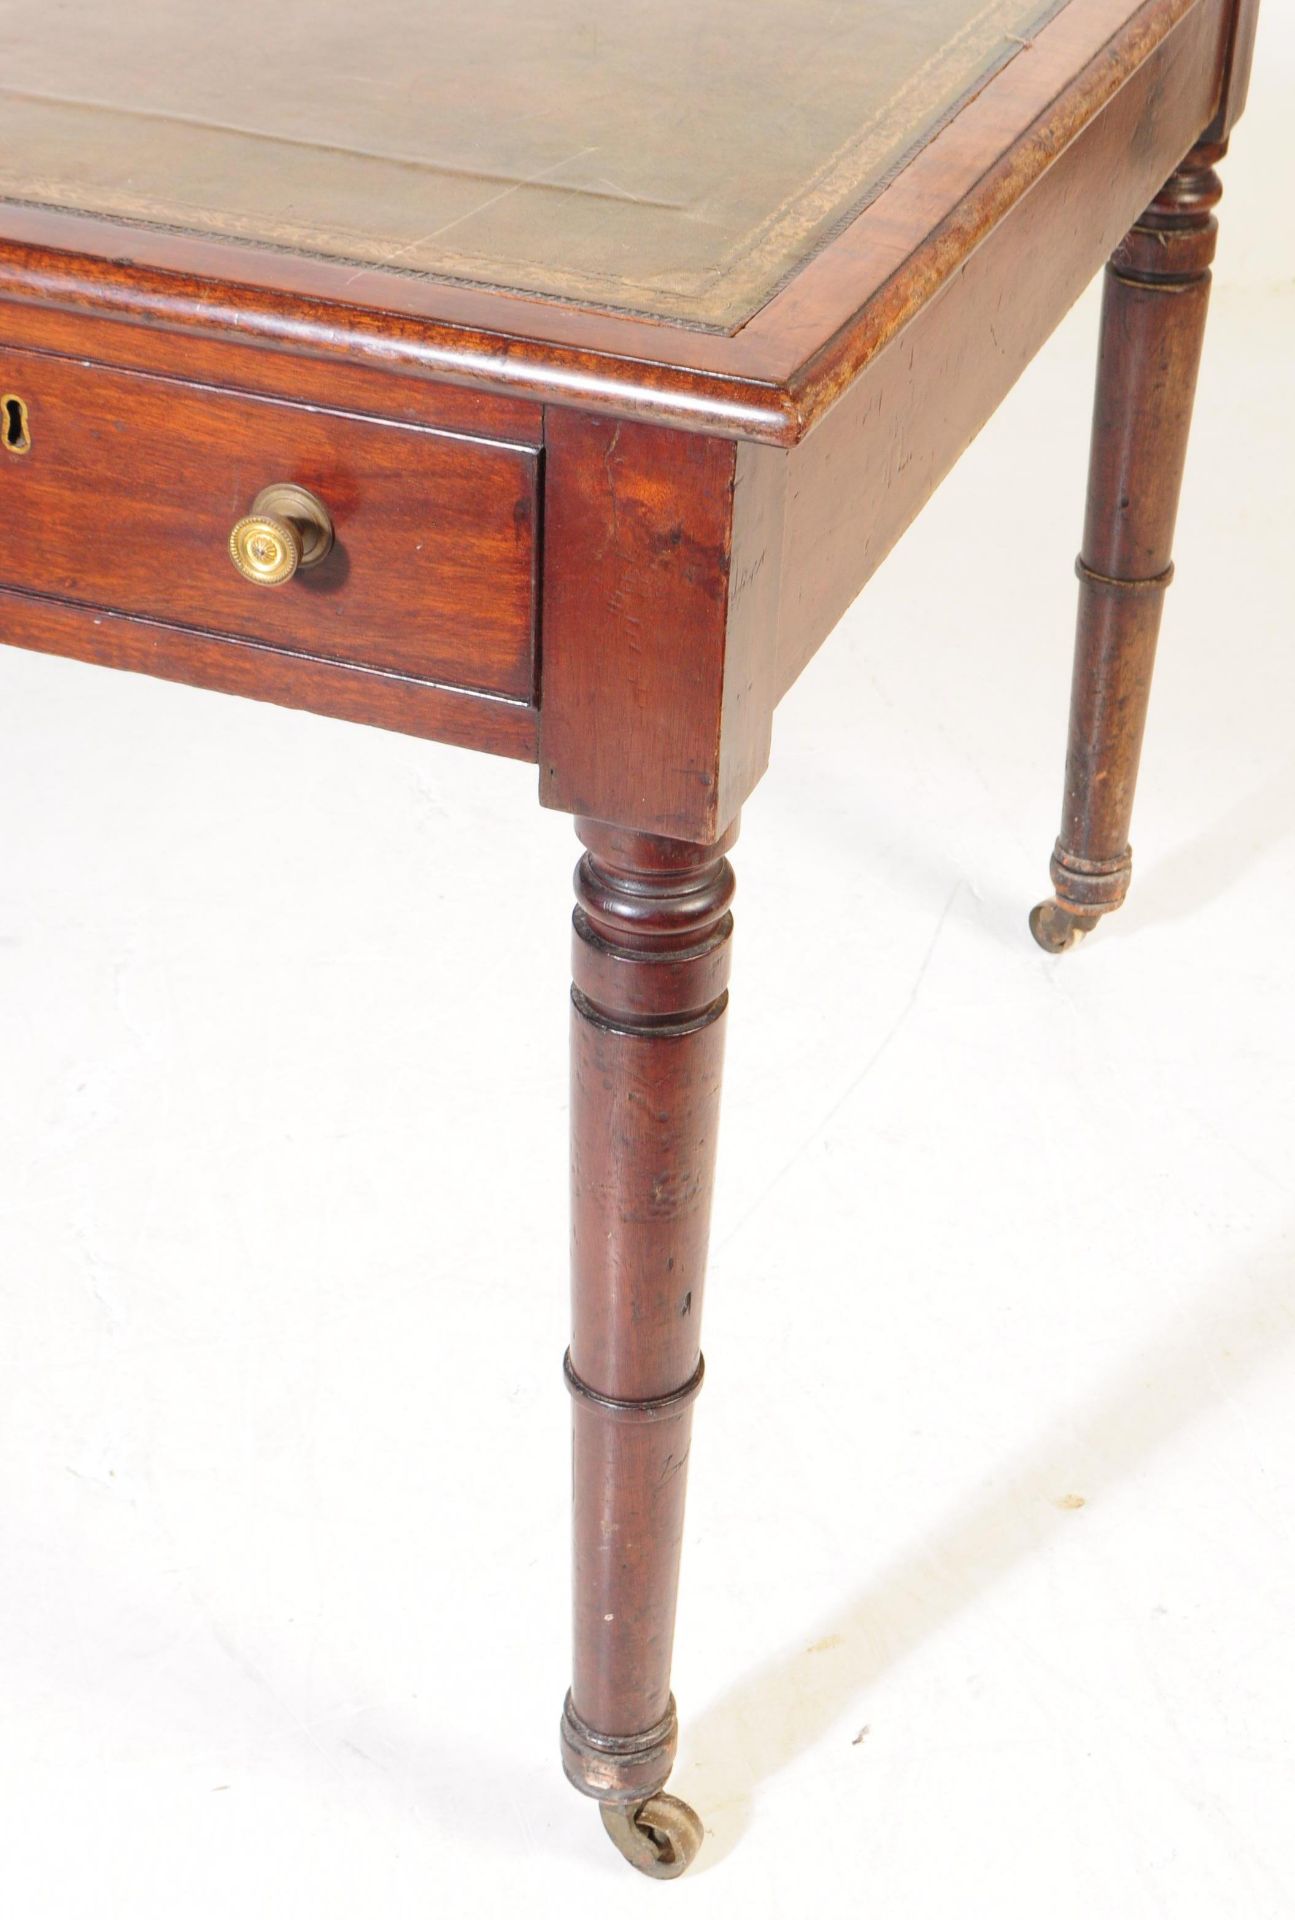 19TH CENTURY GEORGIAN LEATHER WRITING TABLE / DESK - Image 4 of 6